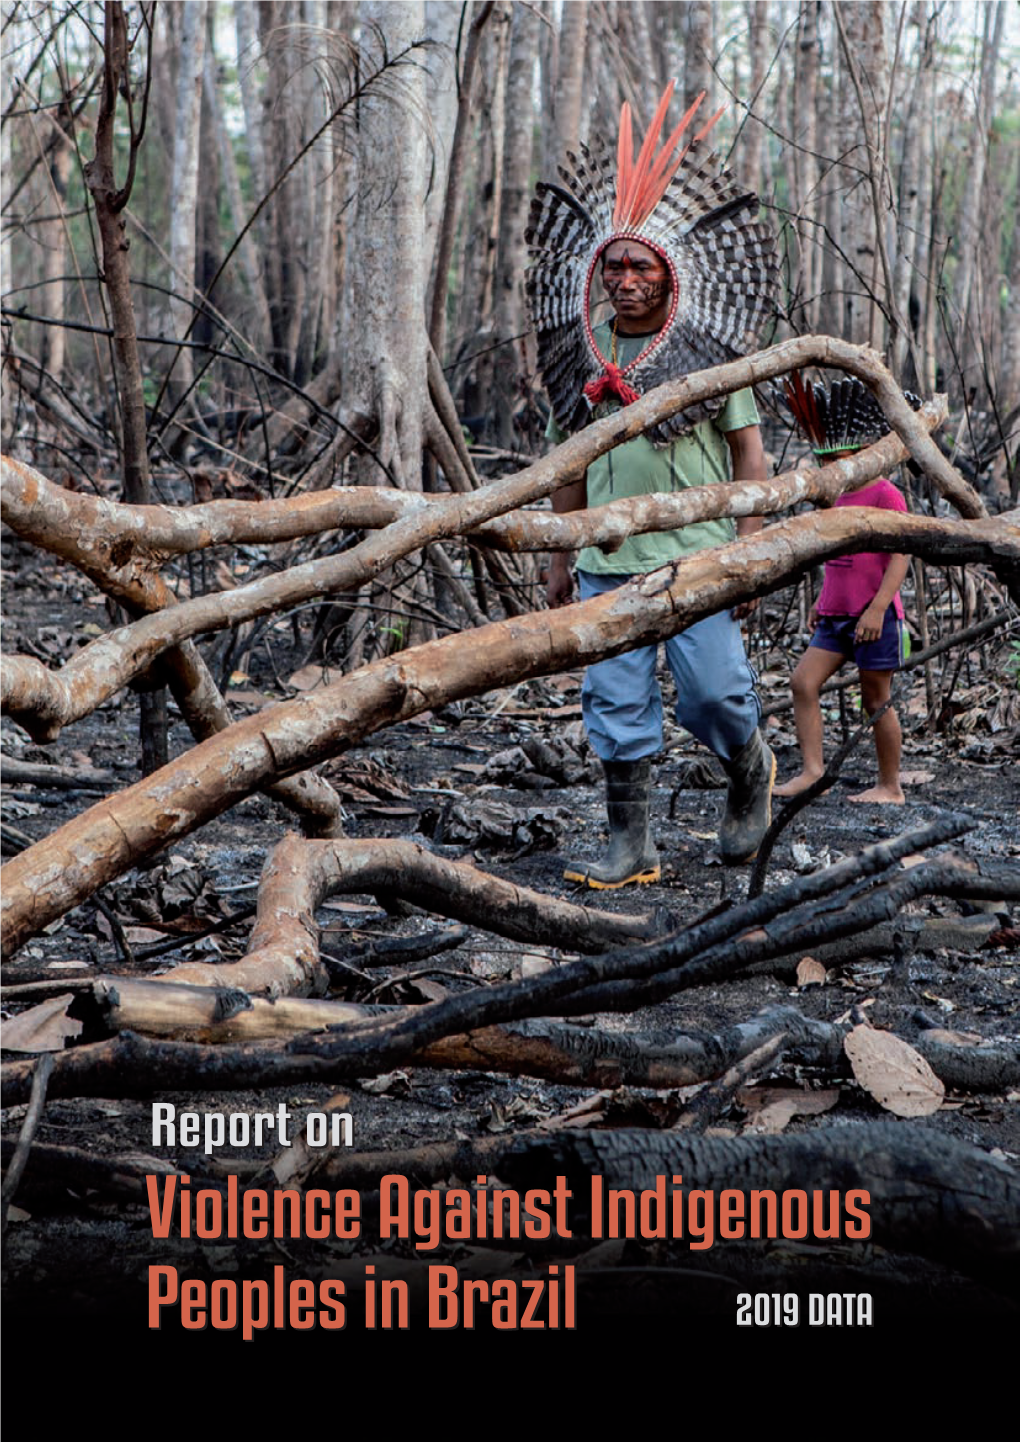 Missionary Council for Indigenous Peoples